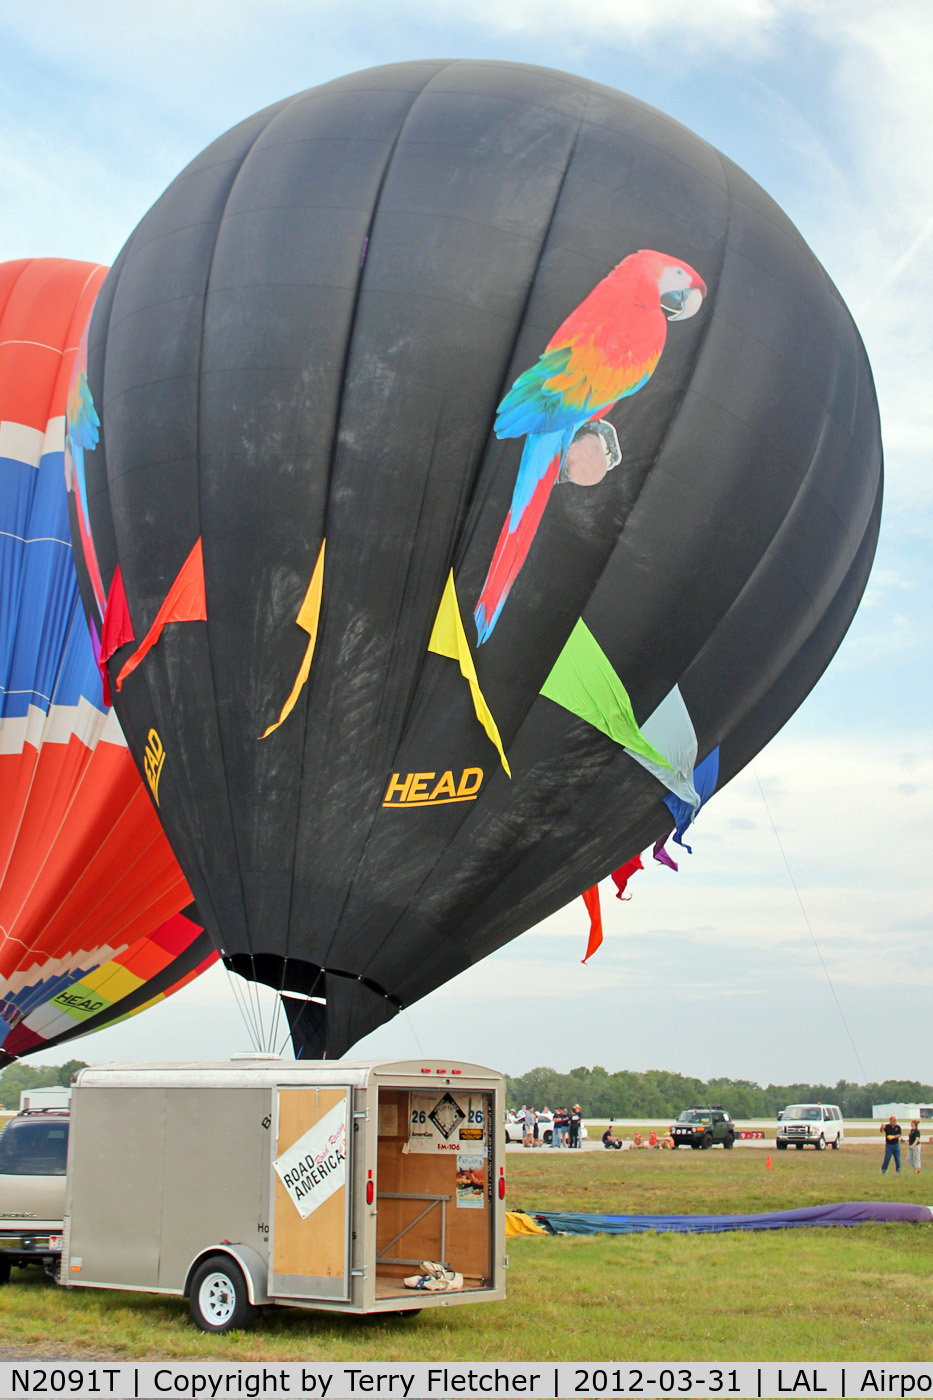 N2091T, 2006 Head Balloons AX8-88B C/N 346, The wind was too strong to allow the full inflation and mass take-off of the balloons at 2012 Sun n Fun